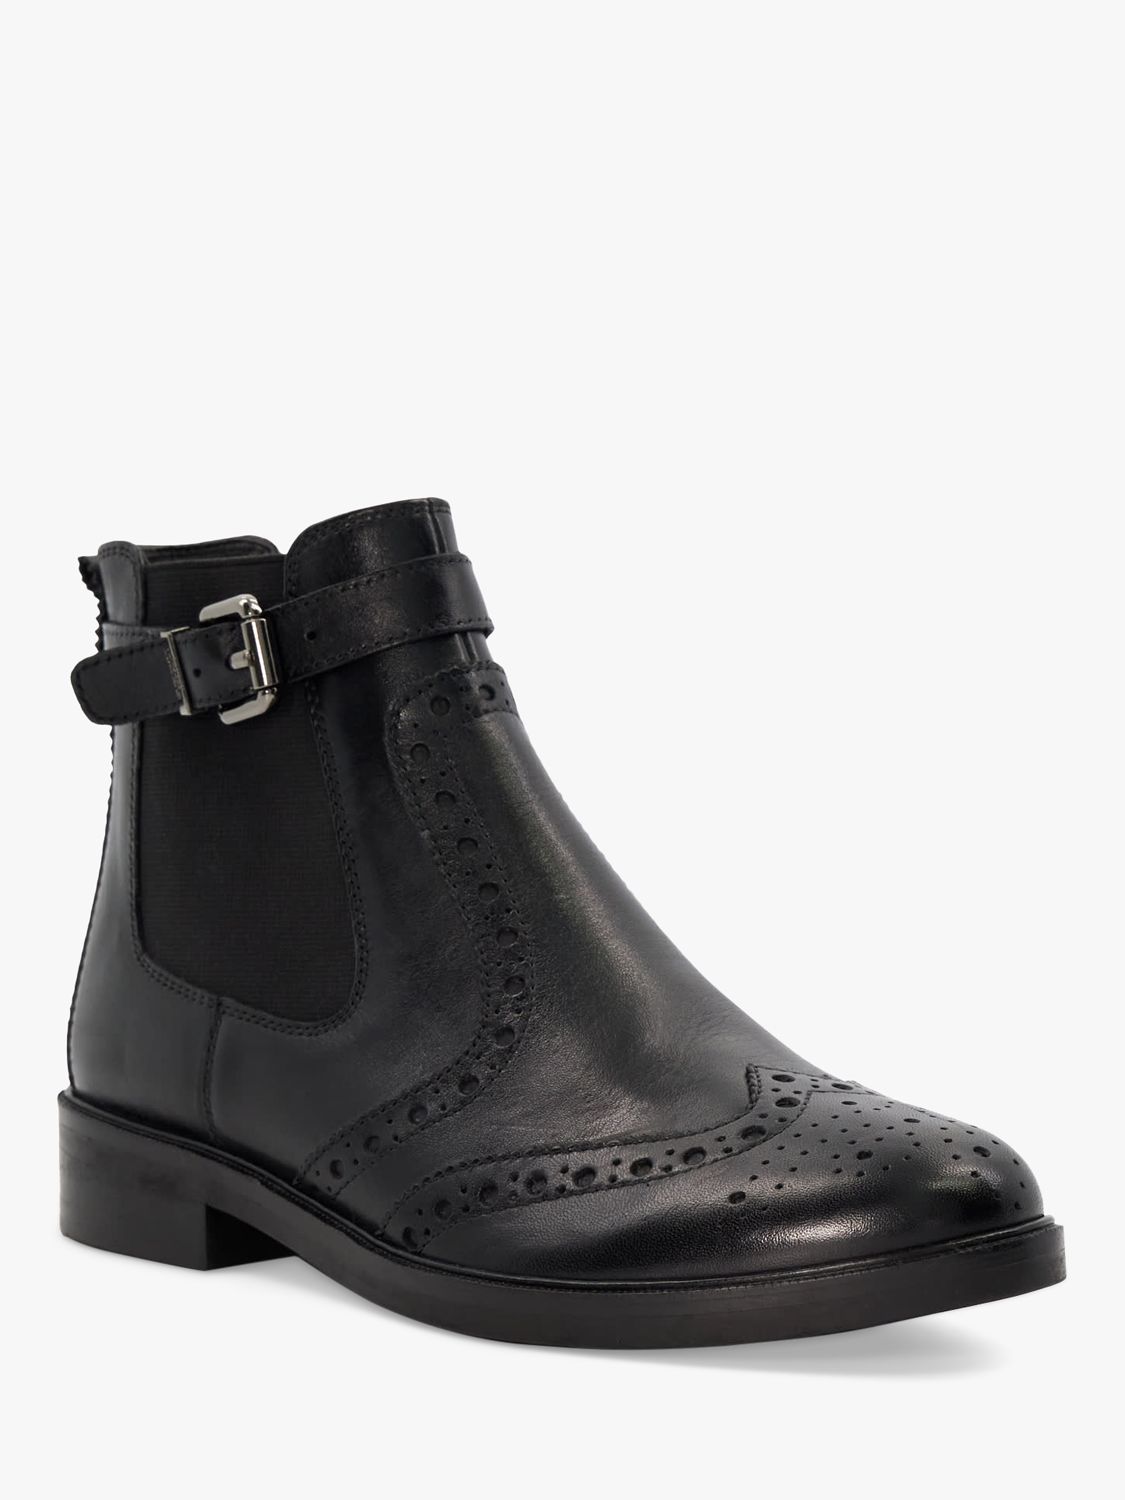 Dune Question Leather Buckle Ankle Boots, Black at John Lewis & Partners